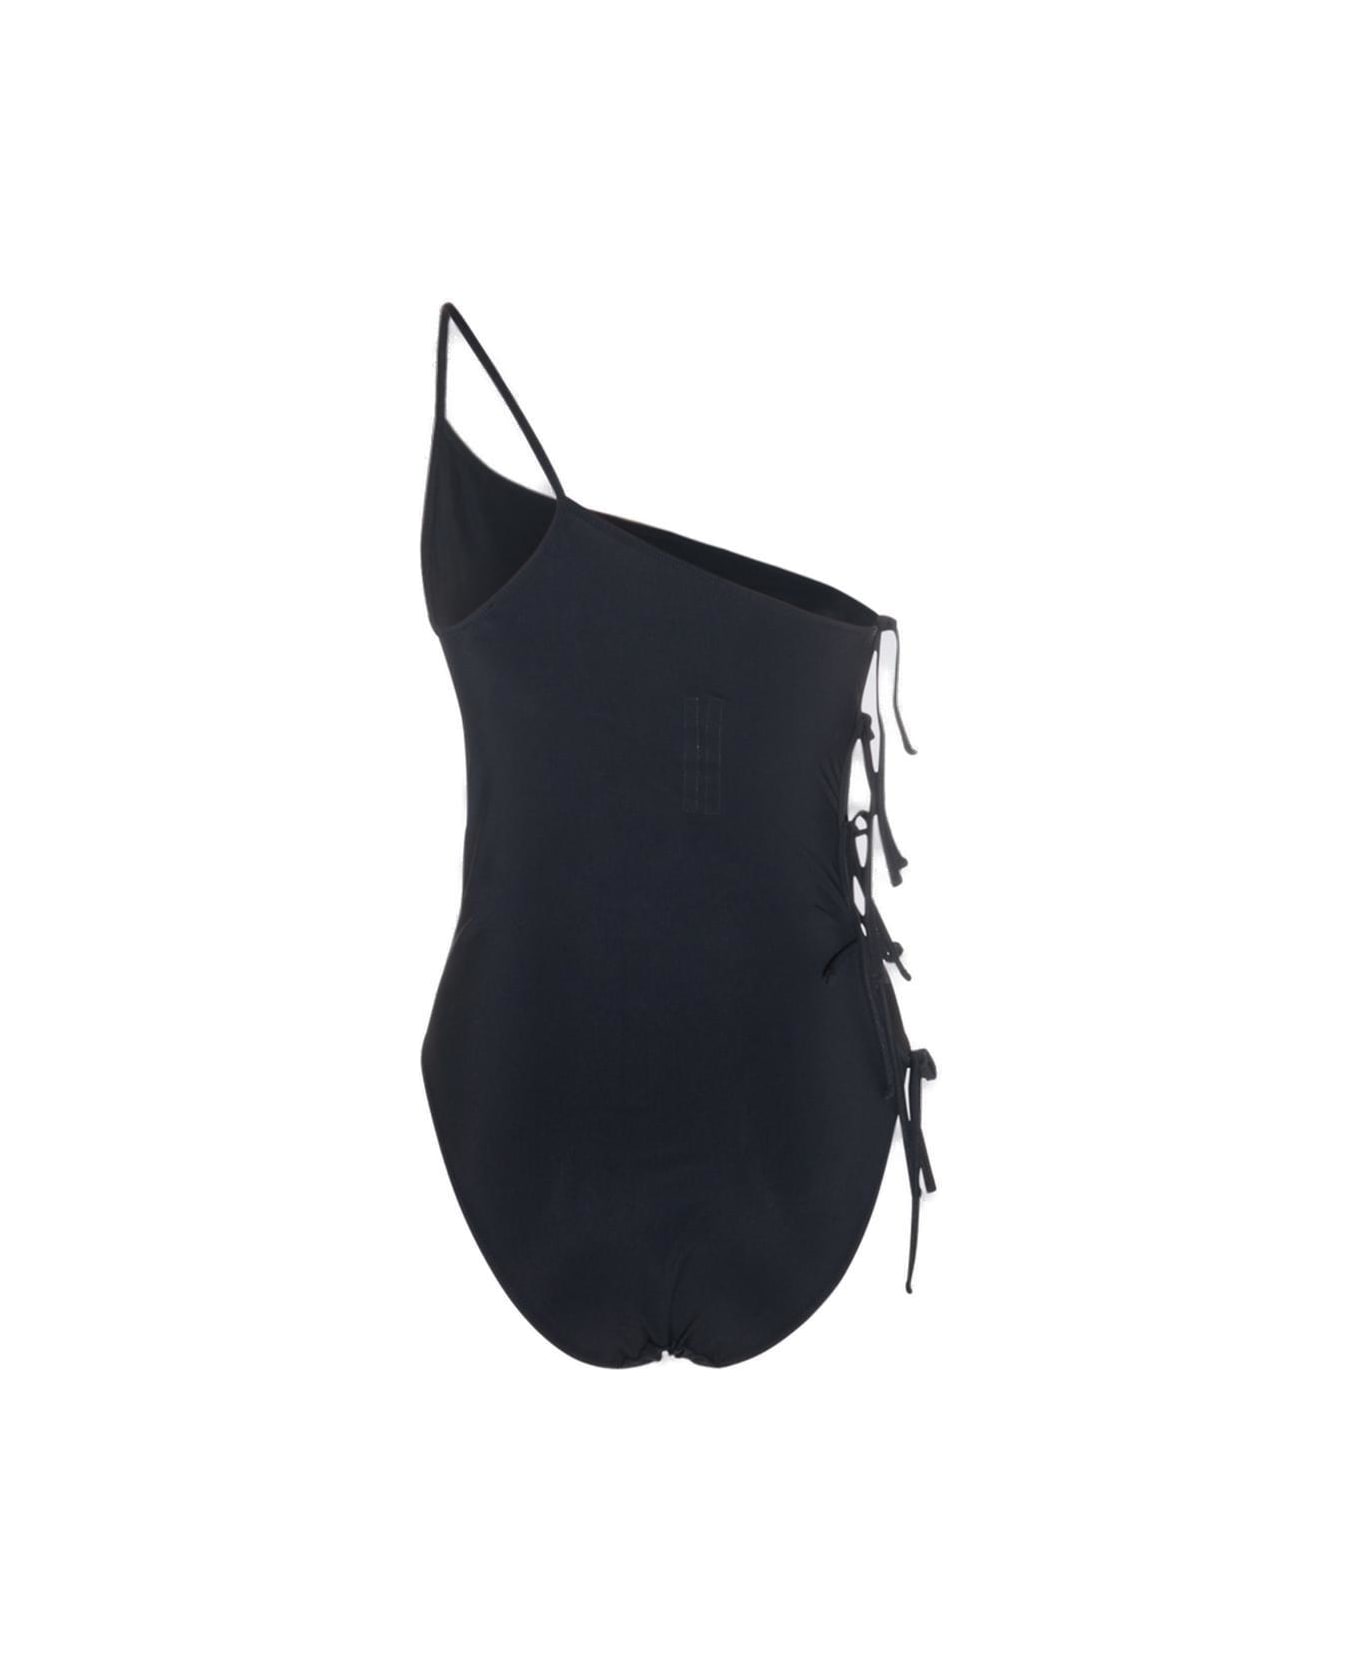 Rick Owens Taco Side Tie Fastened Swimsuit